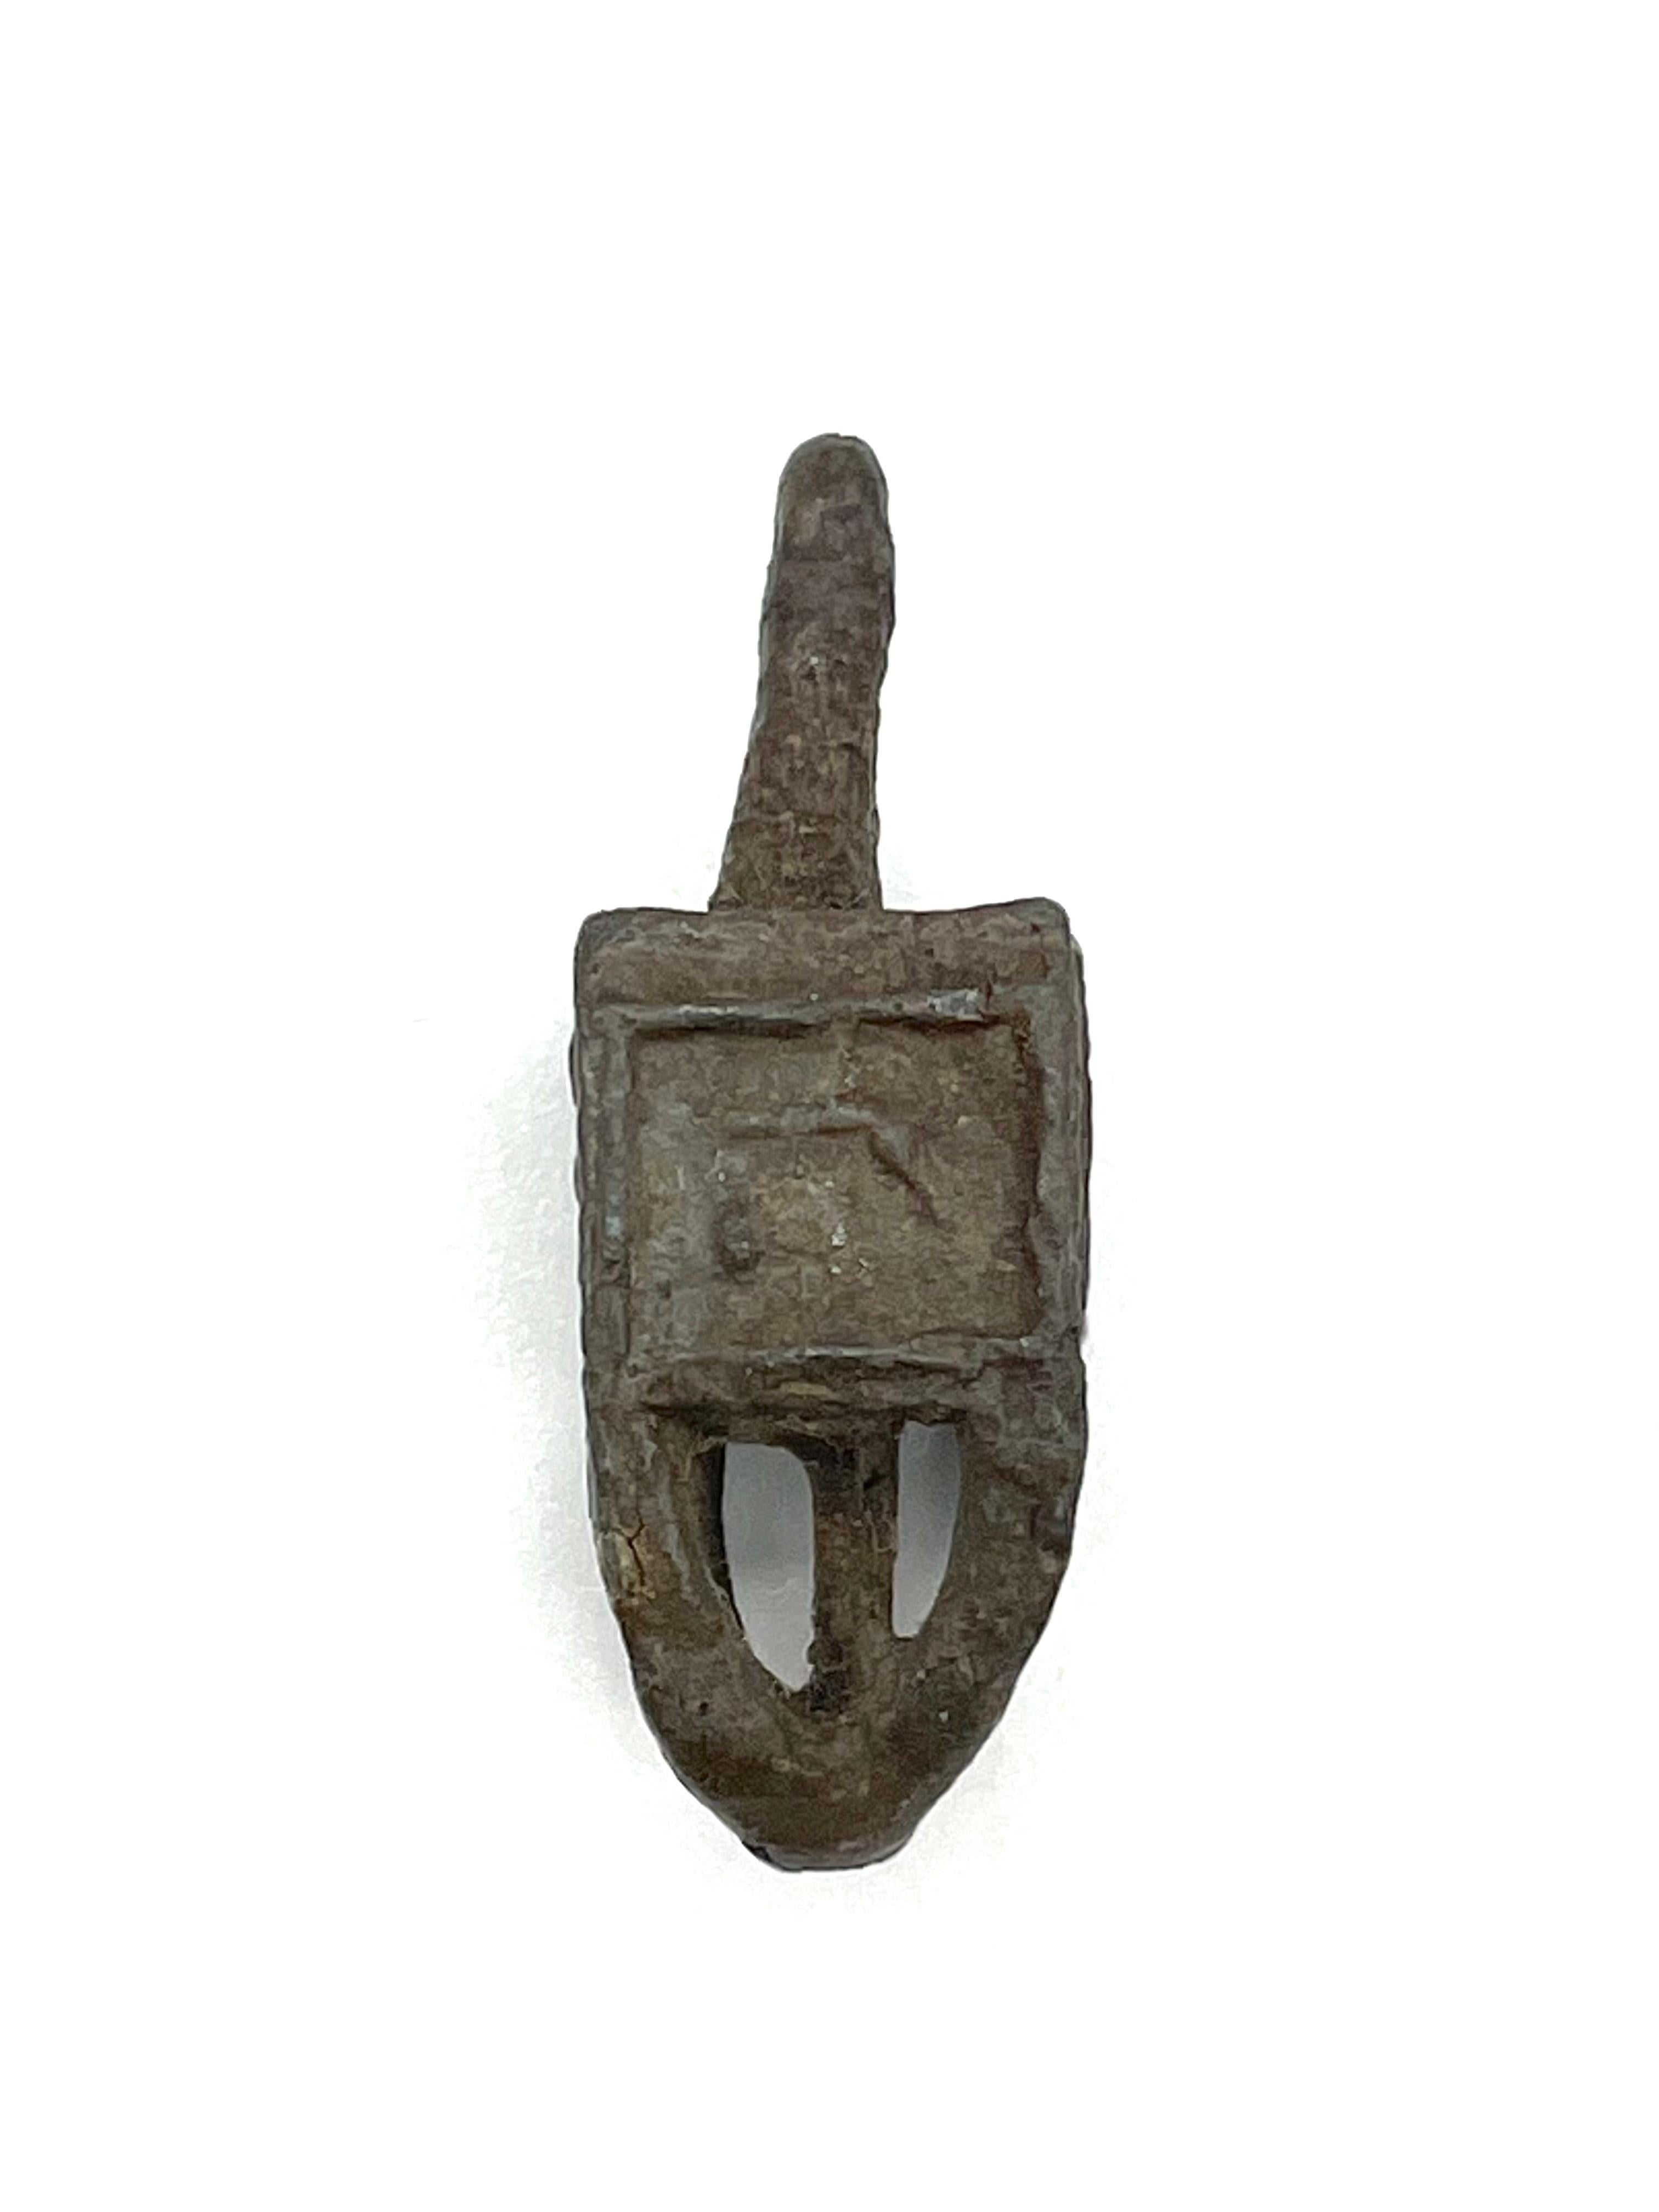 Cast lead Hanukkah dreidel, Poland, circa 1900. Found unearthed after roadwork construction began on Zgierska street in the city of Lodz during the 1950s. Square shaped Hebrew letters inside Star of David with overlay of dense grey cast. Distinctly